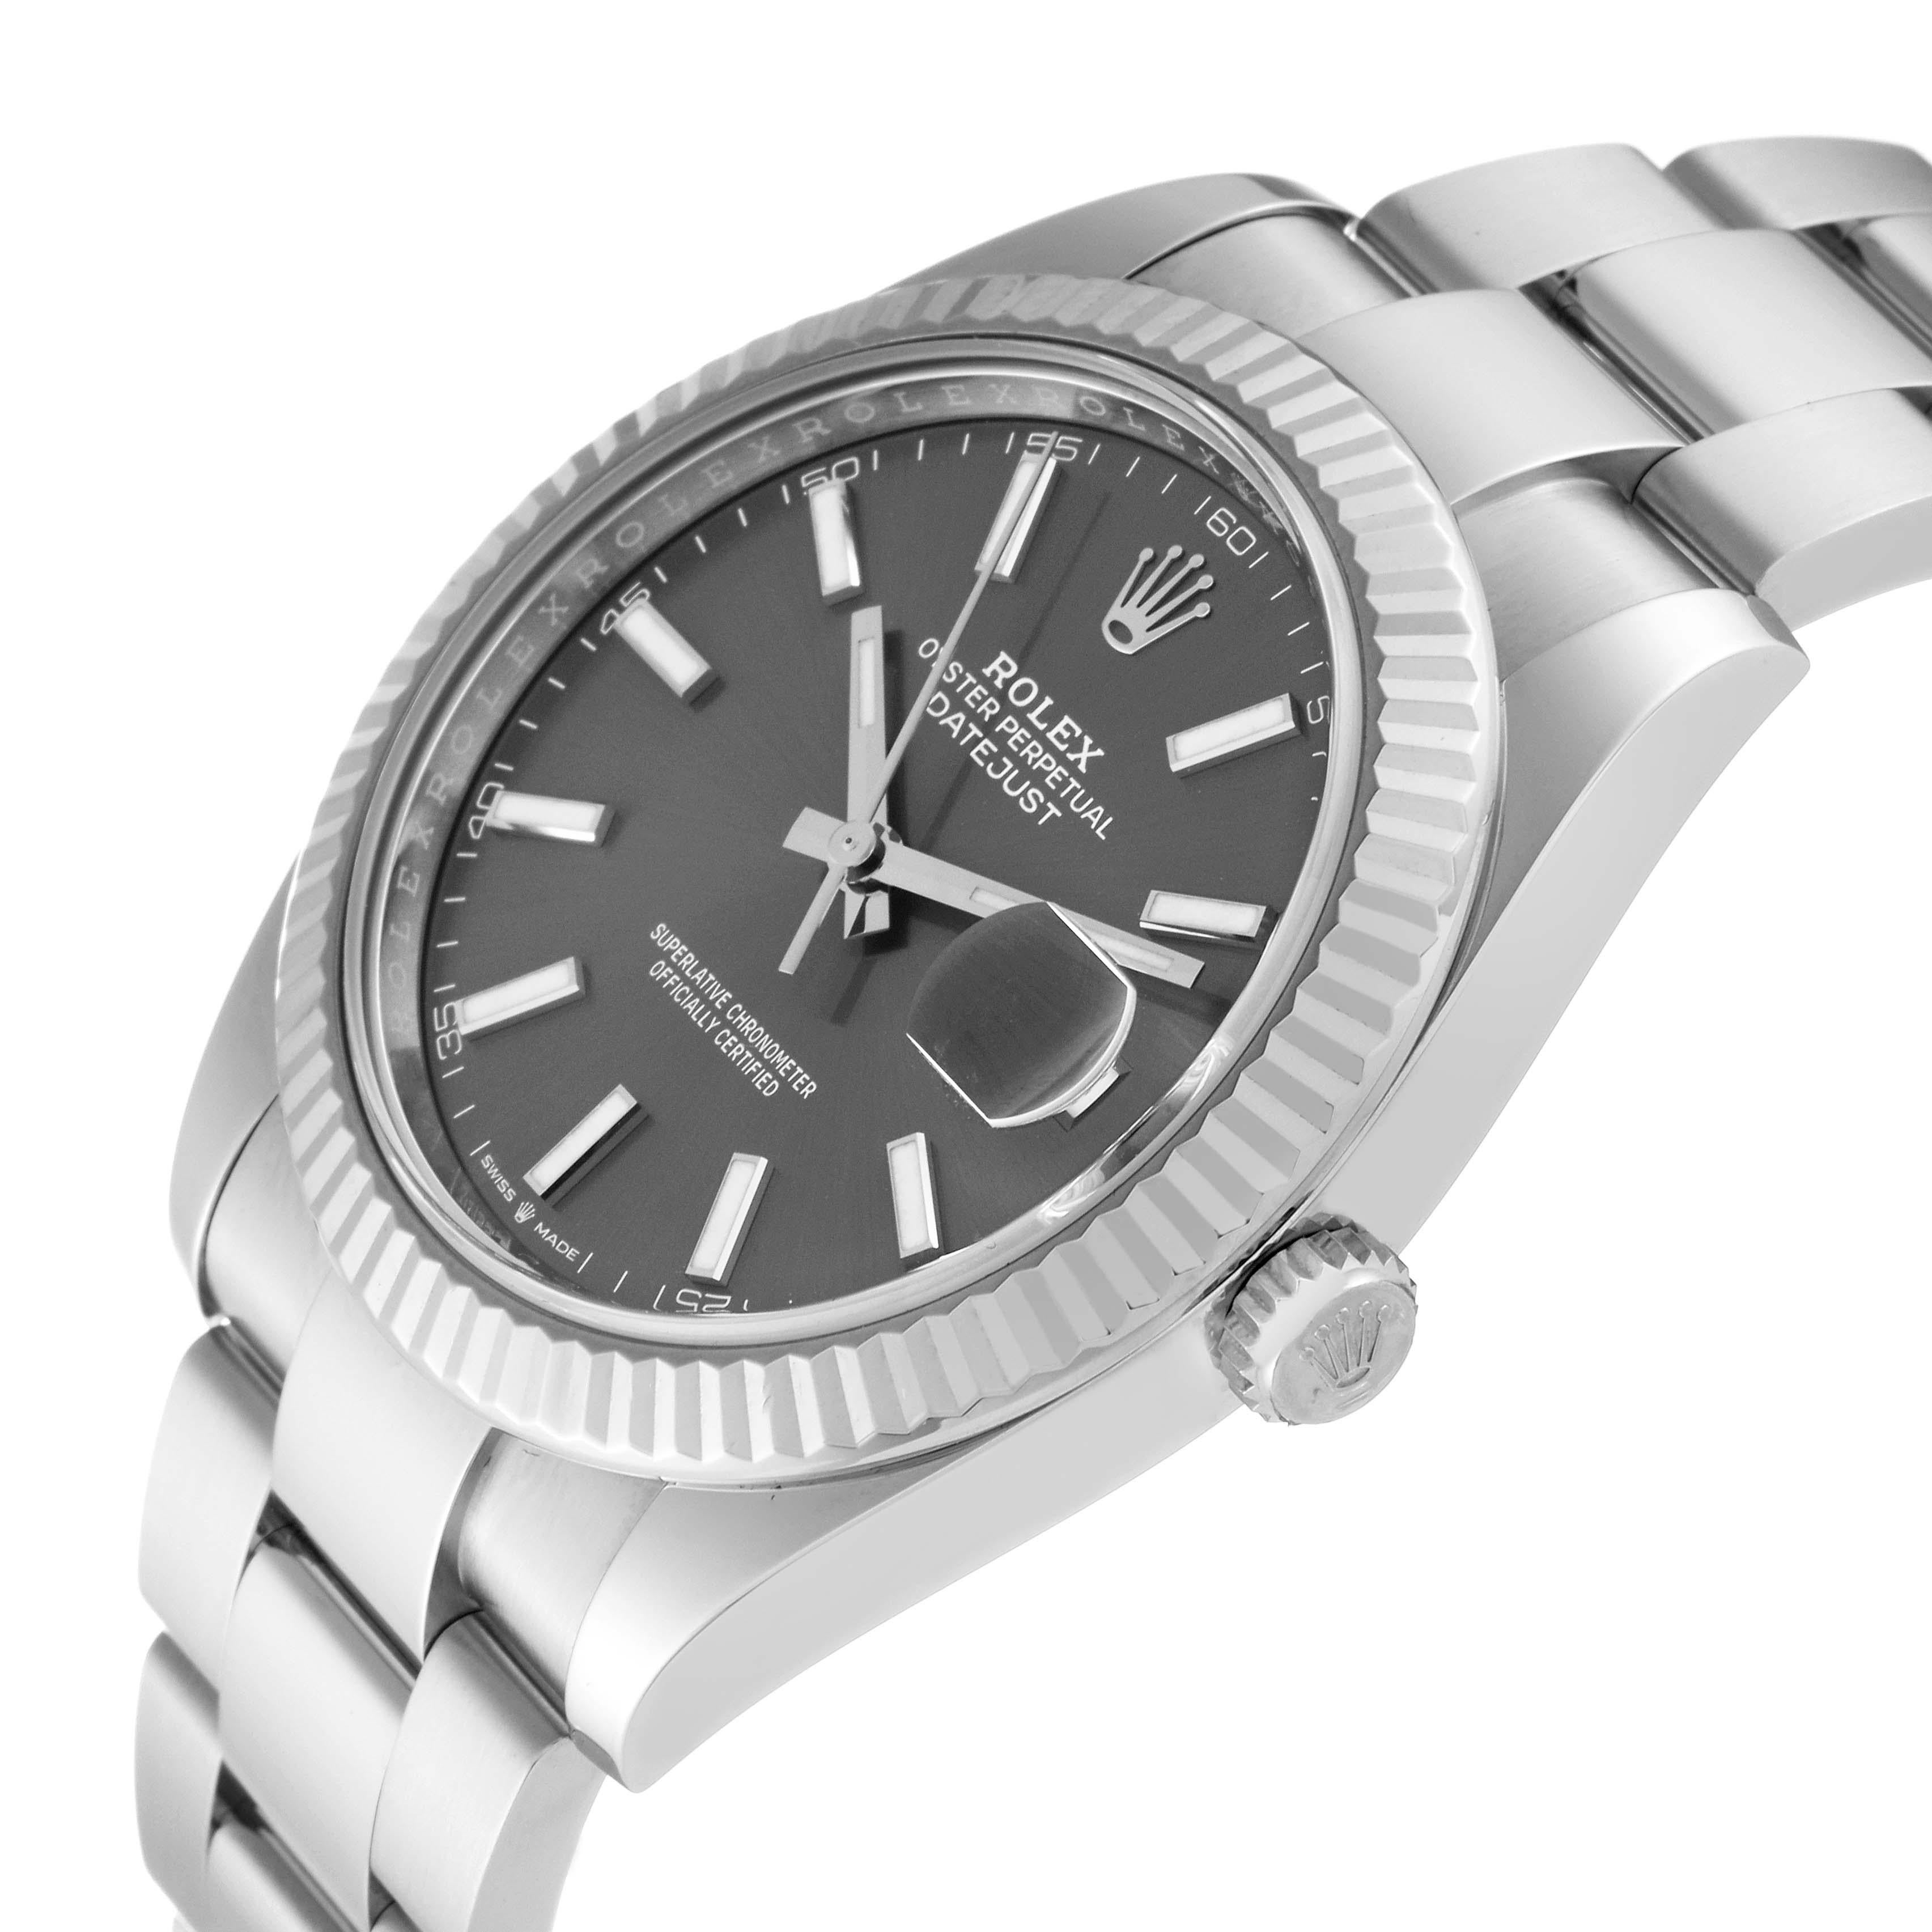 Rolex Datejust 41 Steel White Gold Slate Dial Mens Watch 126334 Box Card For Sale 2